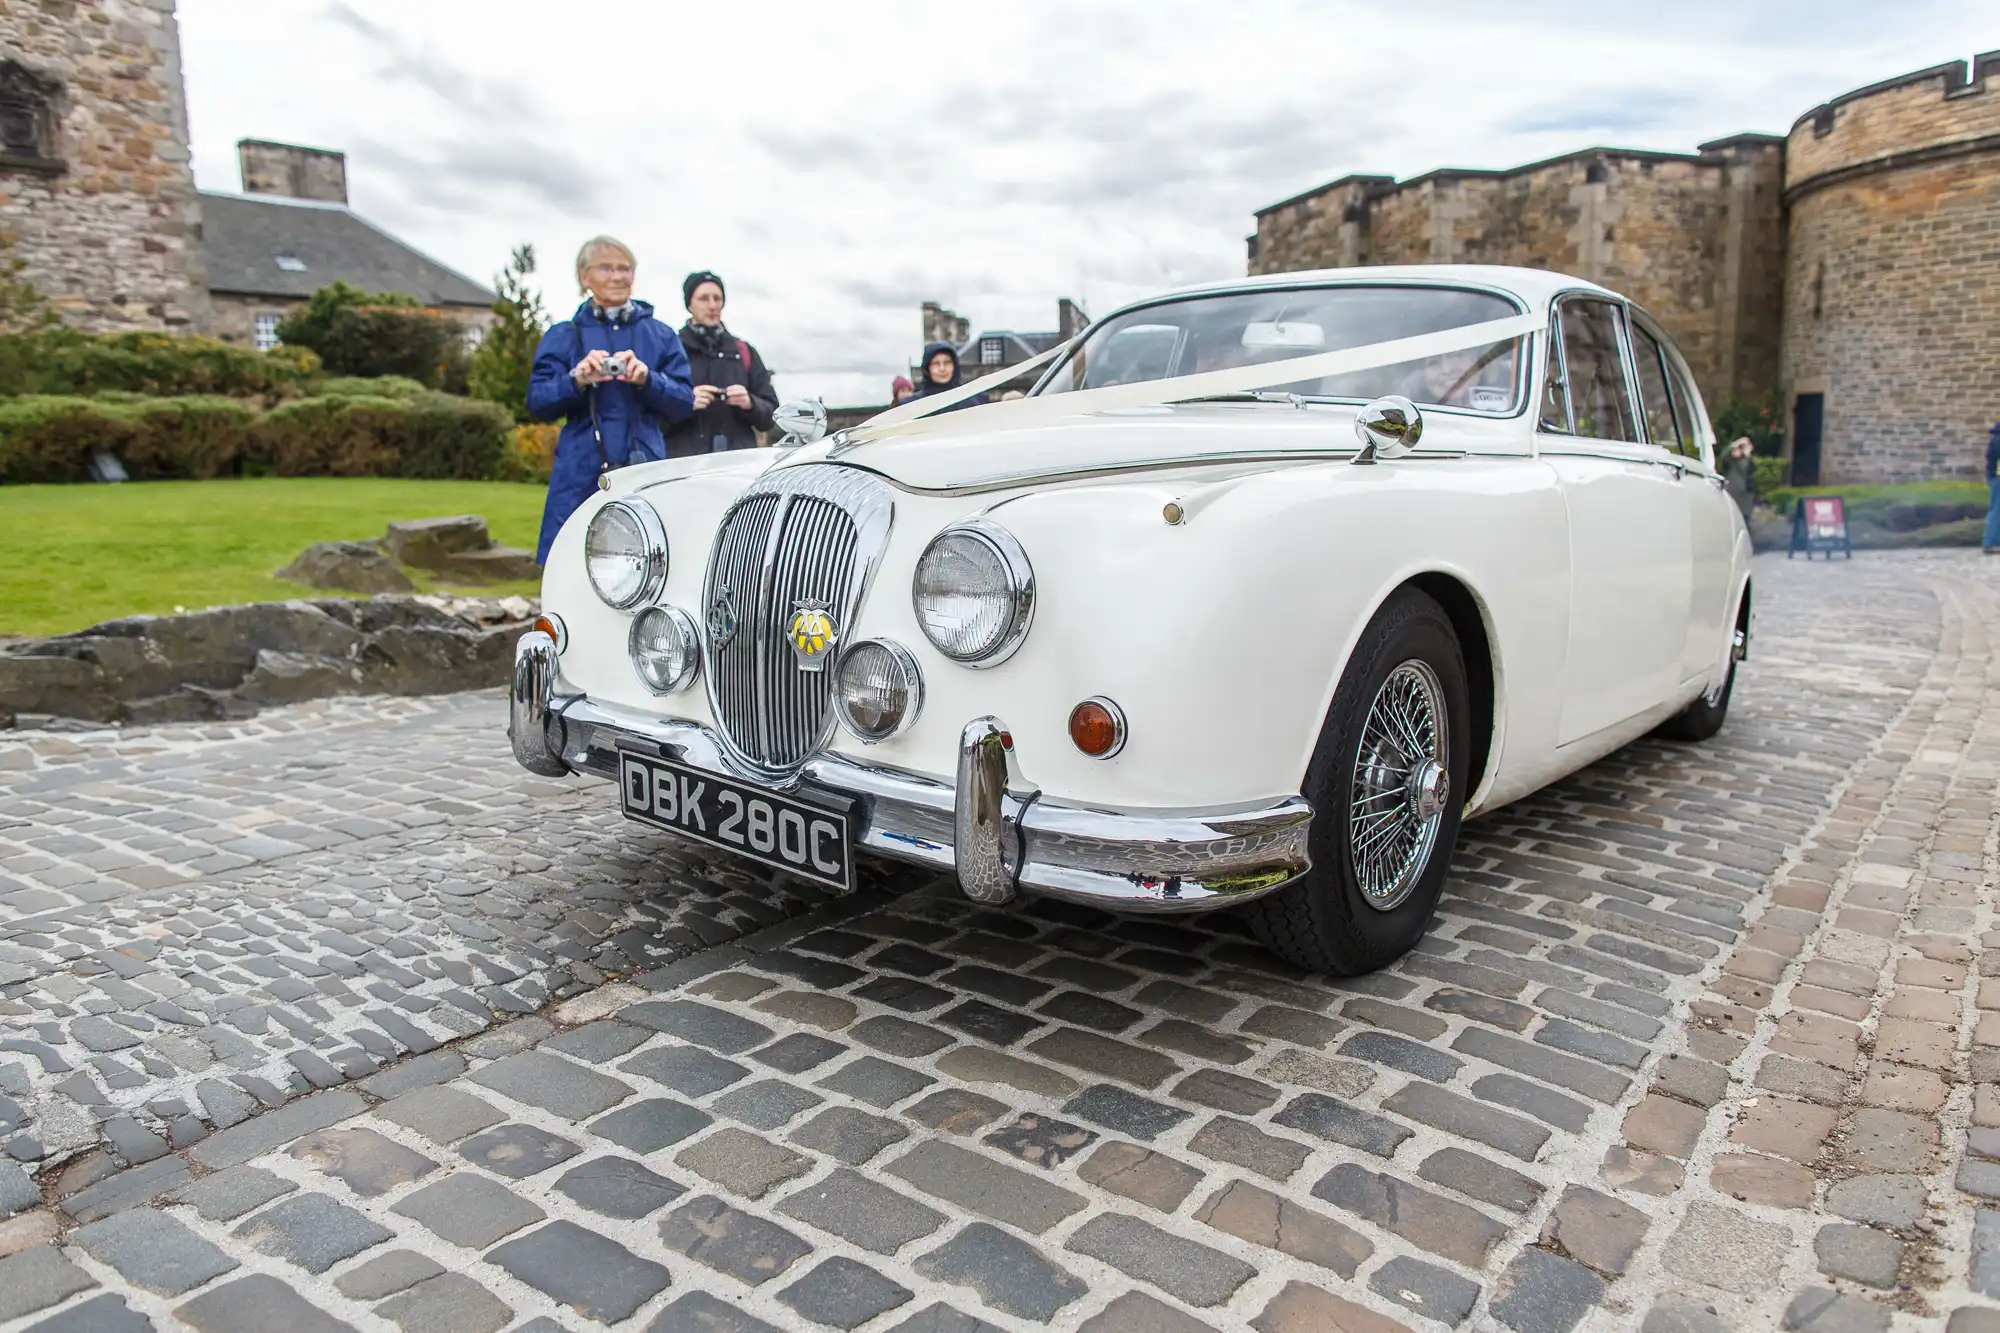 A vintage white jaguar car parked on cobblestones with a castle in the background and two people, one standing and one inside the car, dressed in formal wear.